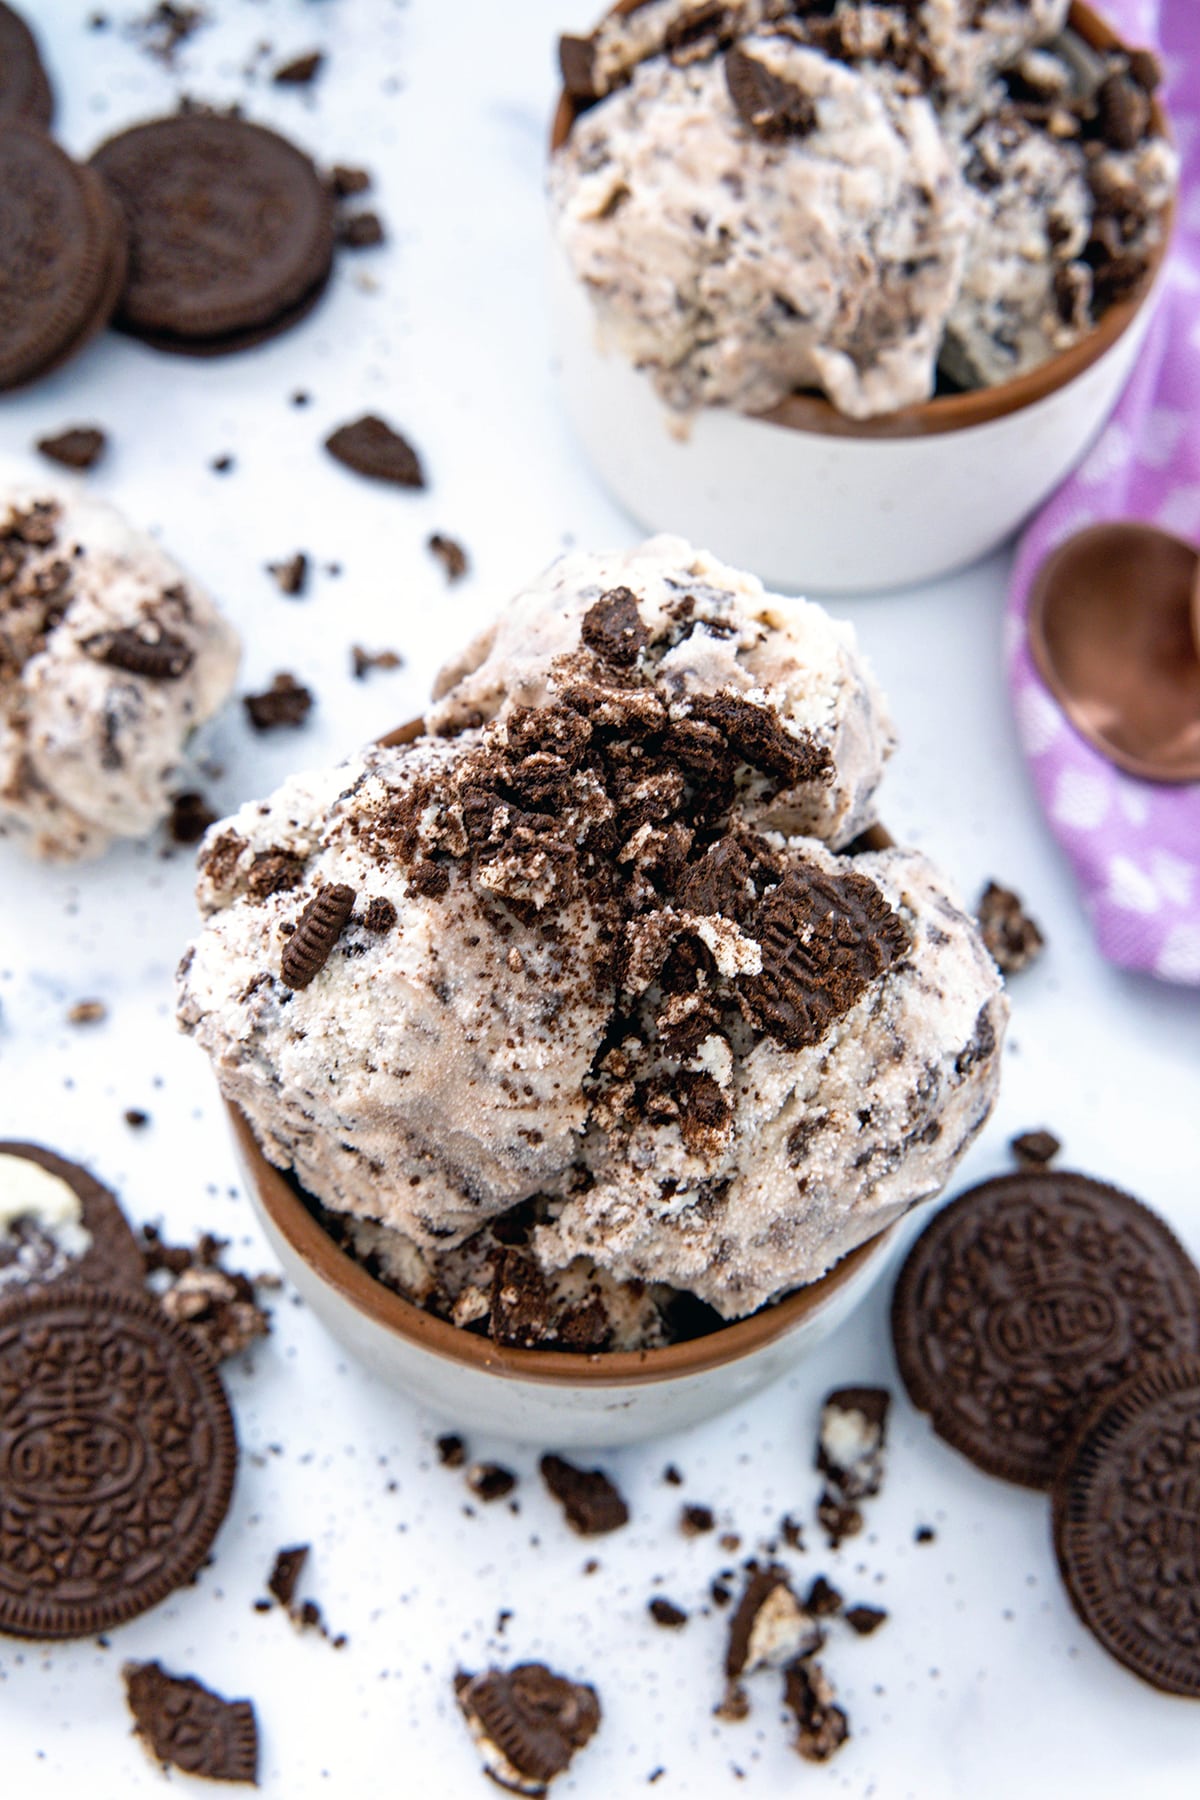 Overhead view of two bowls of Oreo ice cream with crushed and whole Oreo cookies all around.